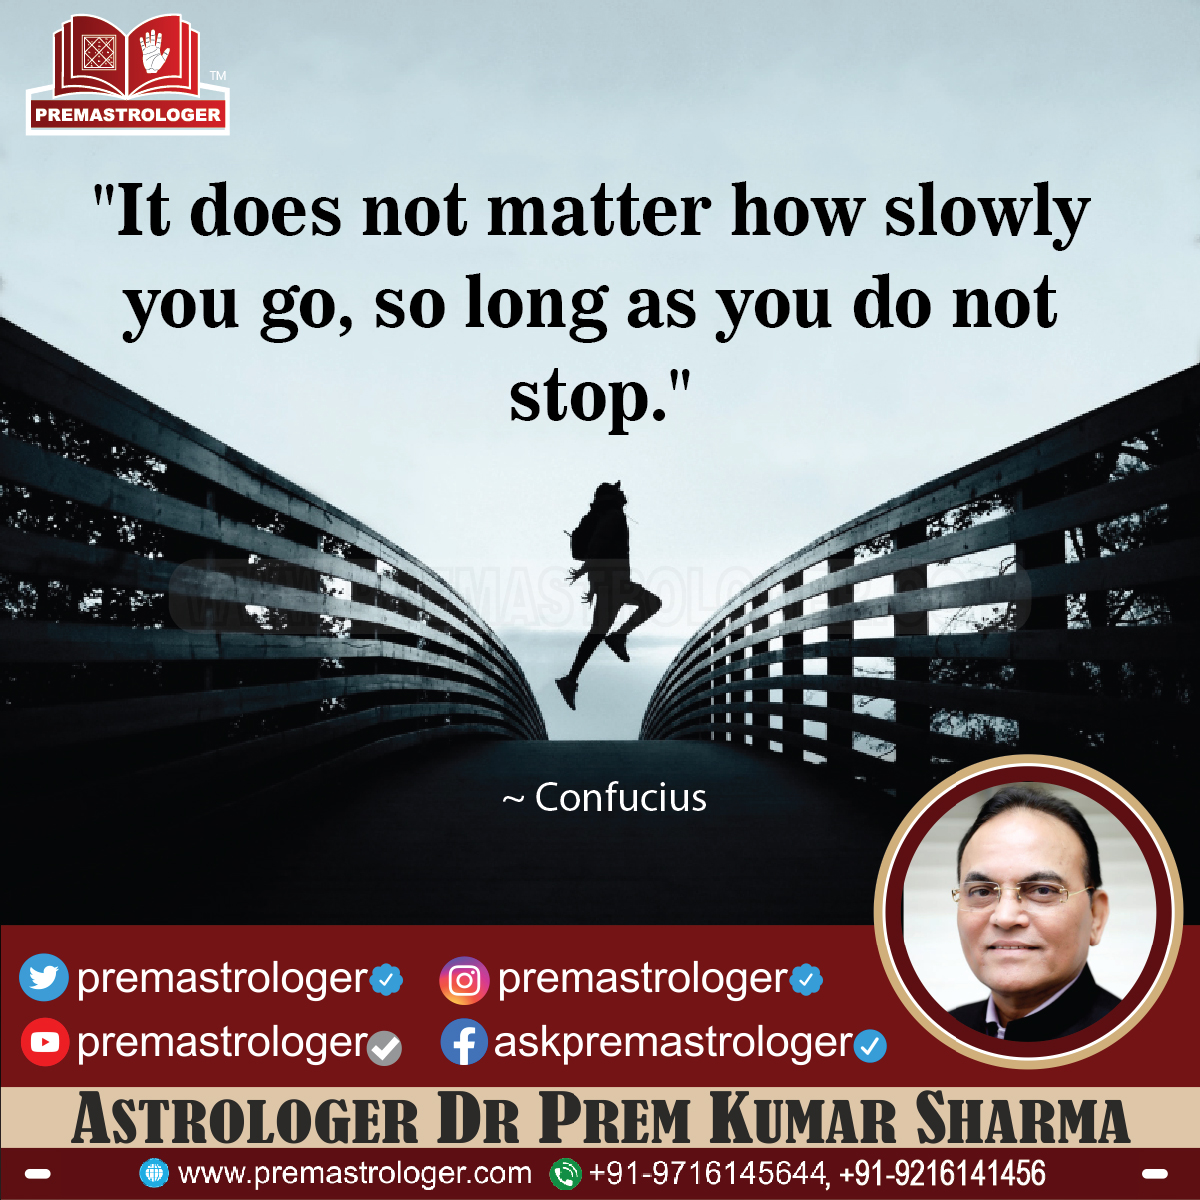 'It does not matter how slowly you go, so long as you do not stop.' 

- Confucius

#MotivationalQuotes
#motivational
#positivityspread
#PositiveVibesOnly